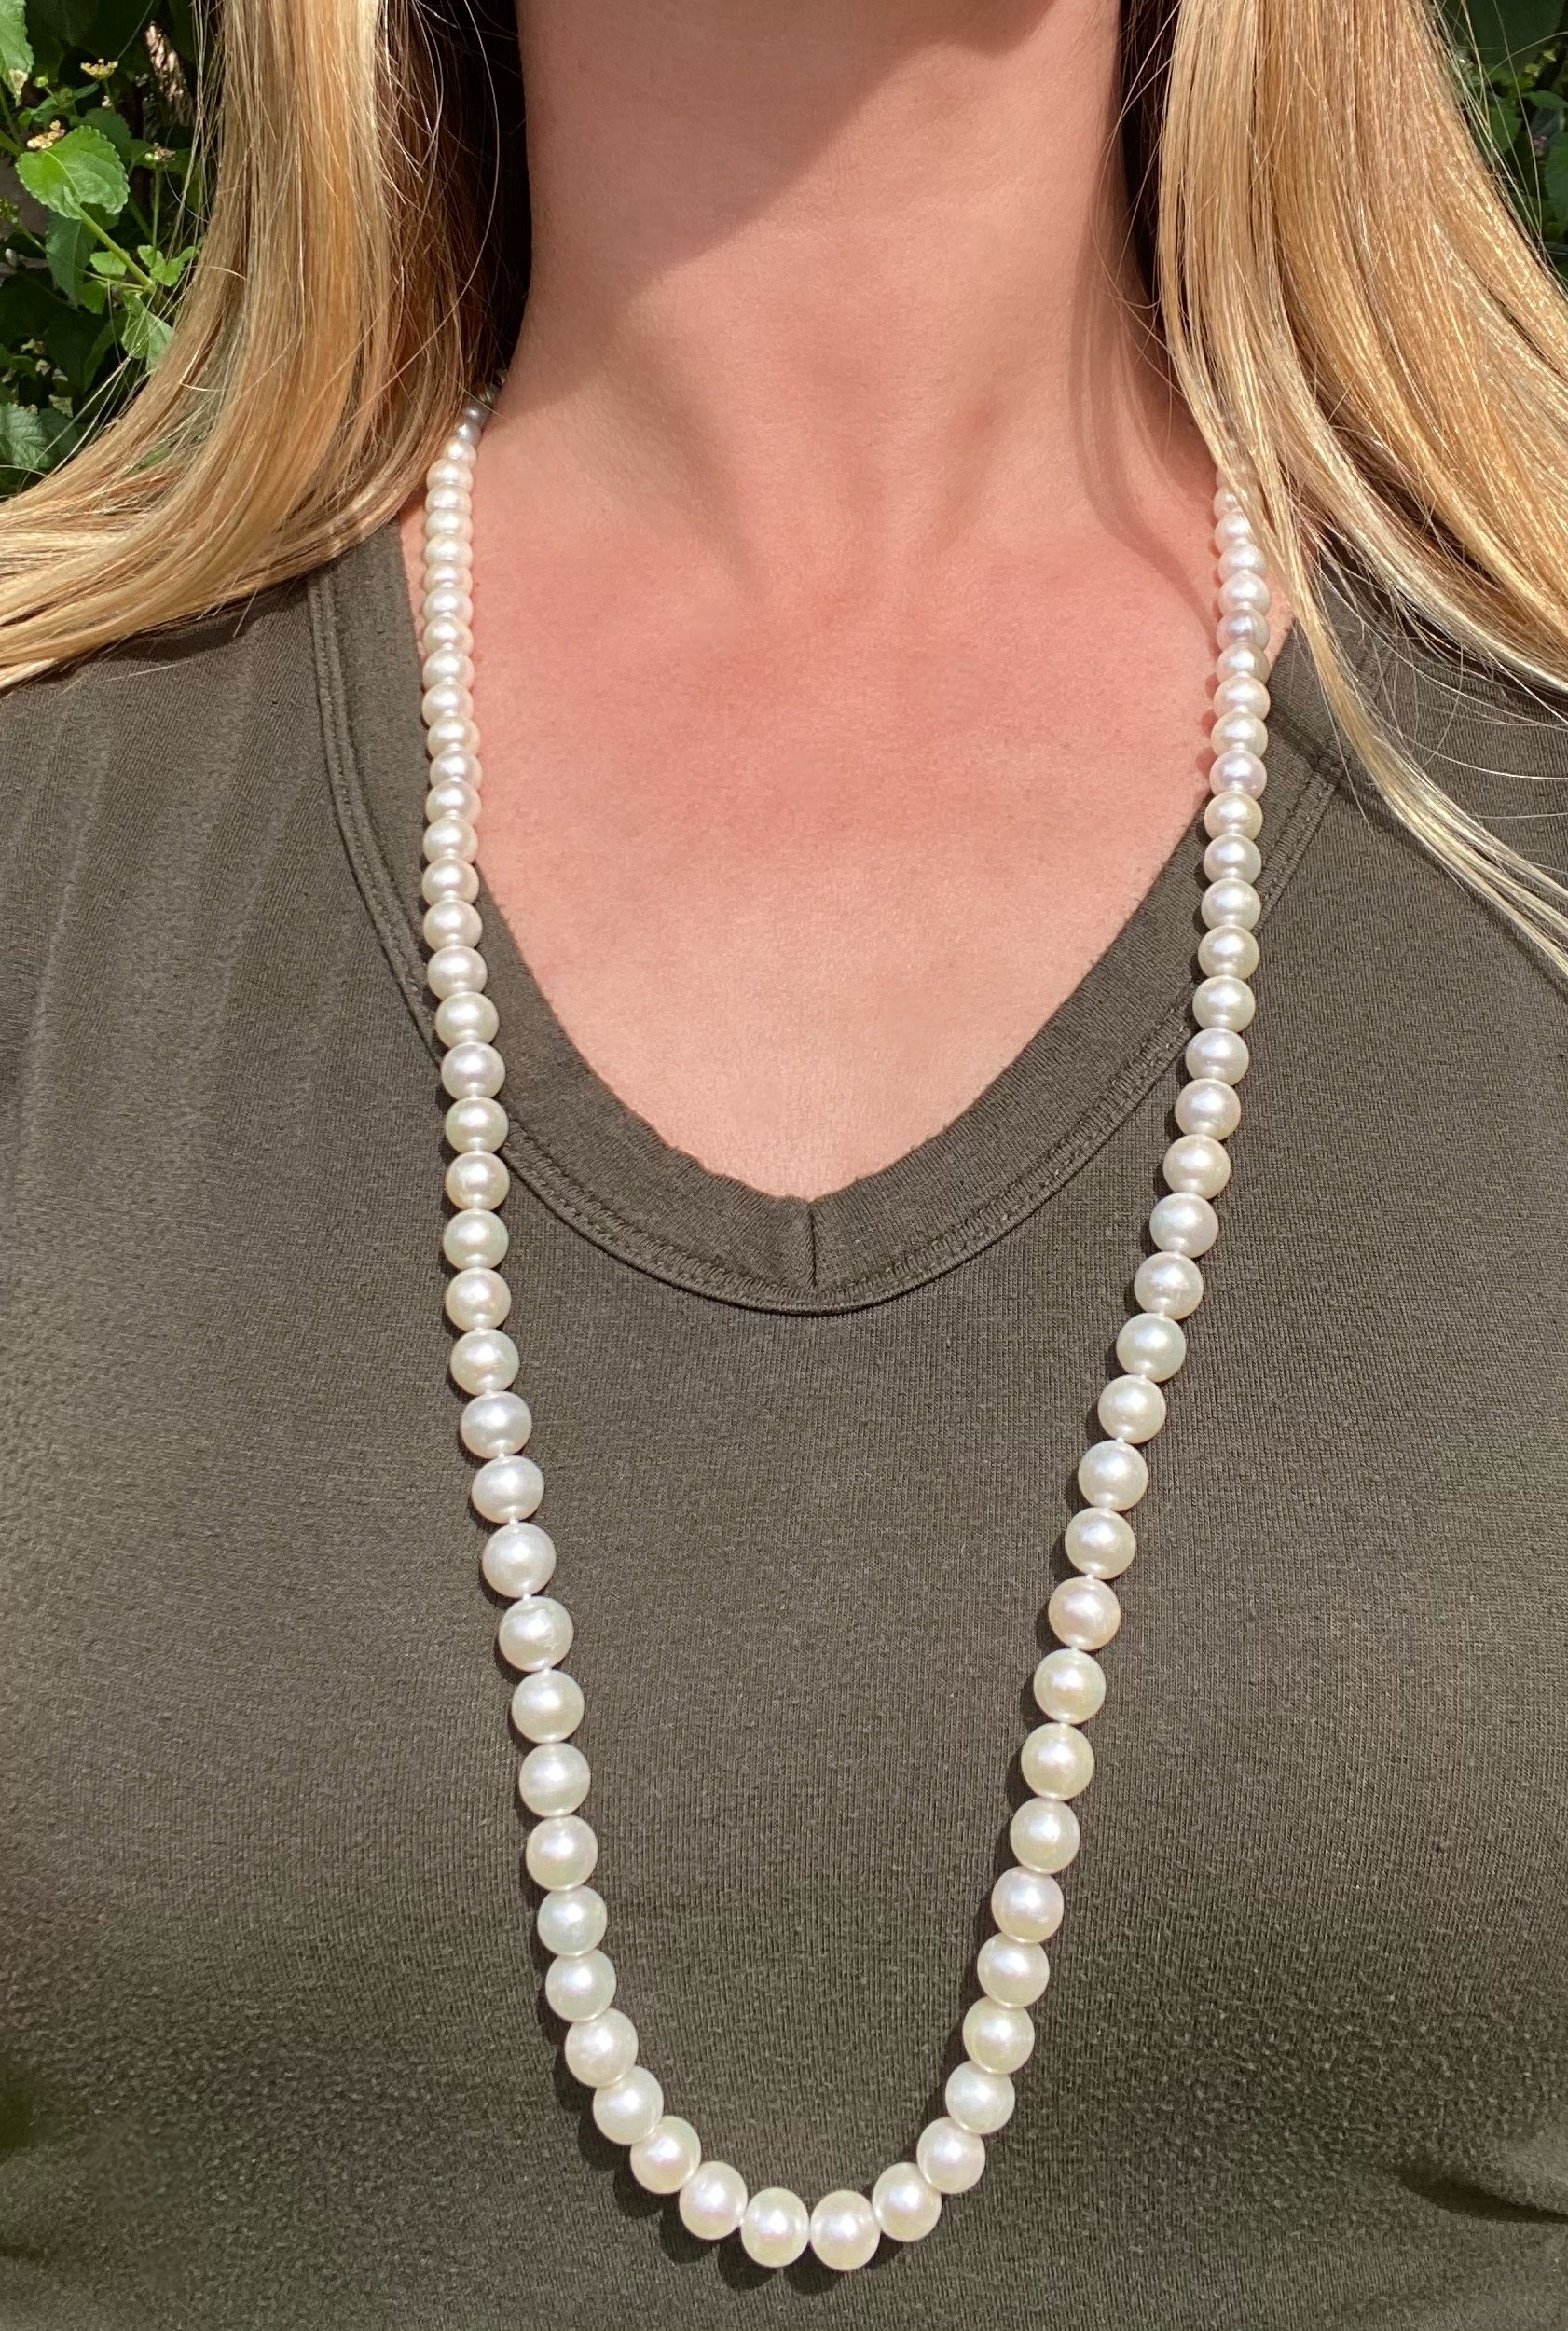 14K YG 8.5mm Freshwater Pearl Necklace 35"